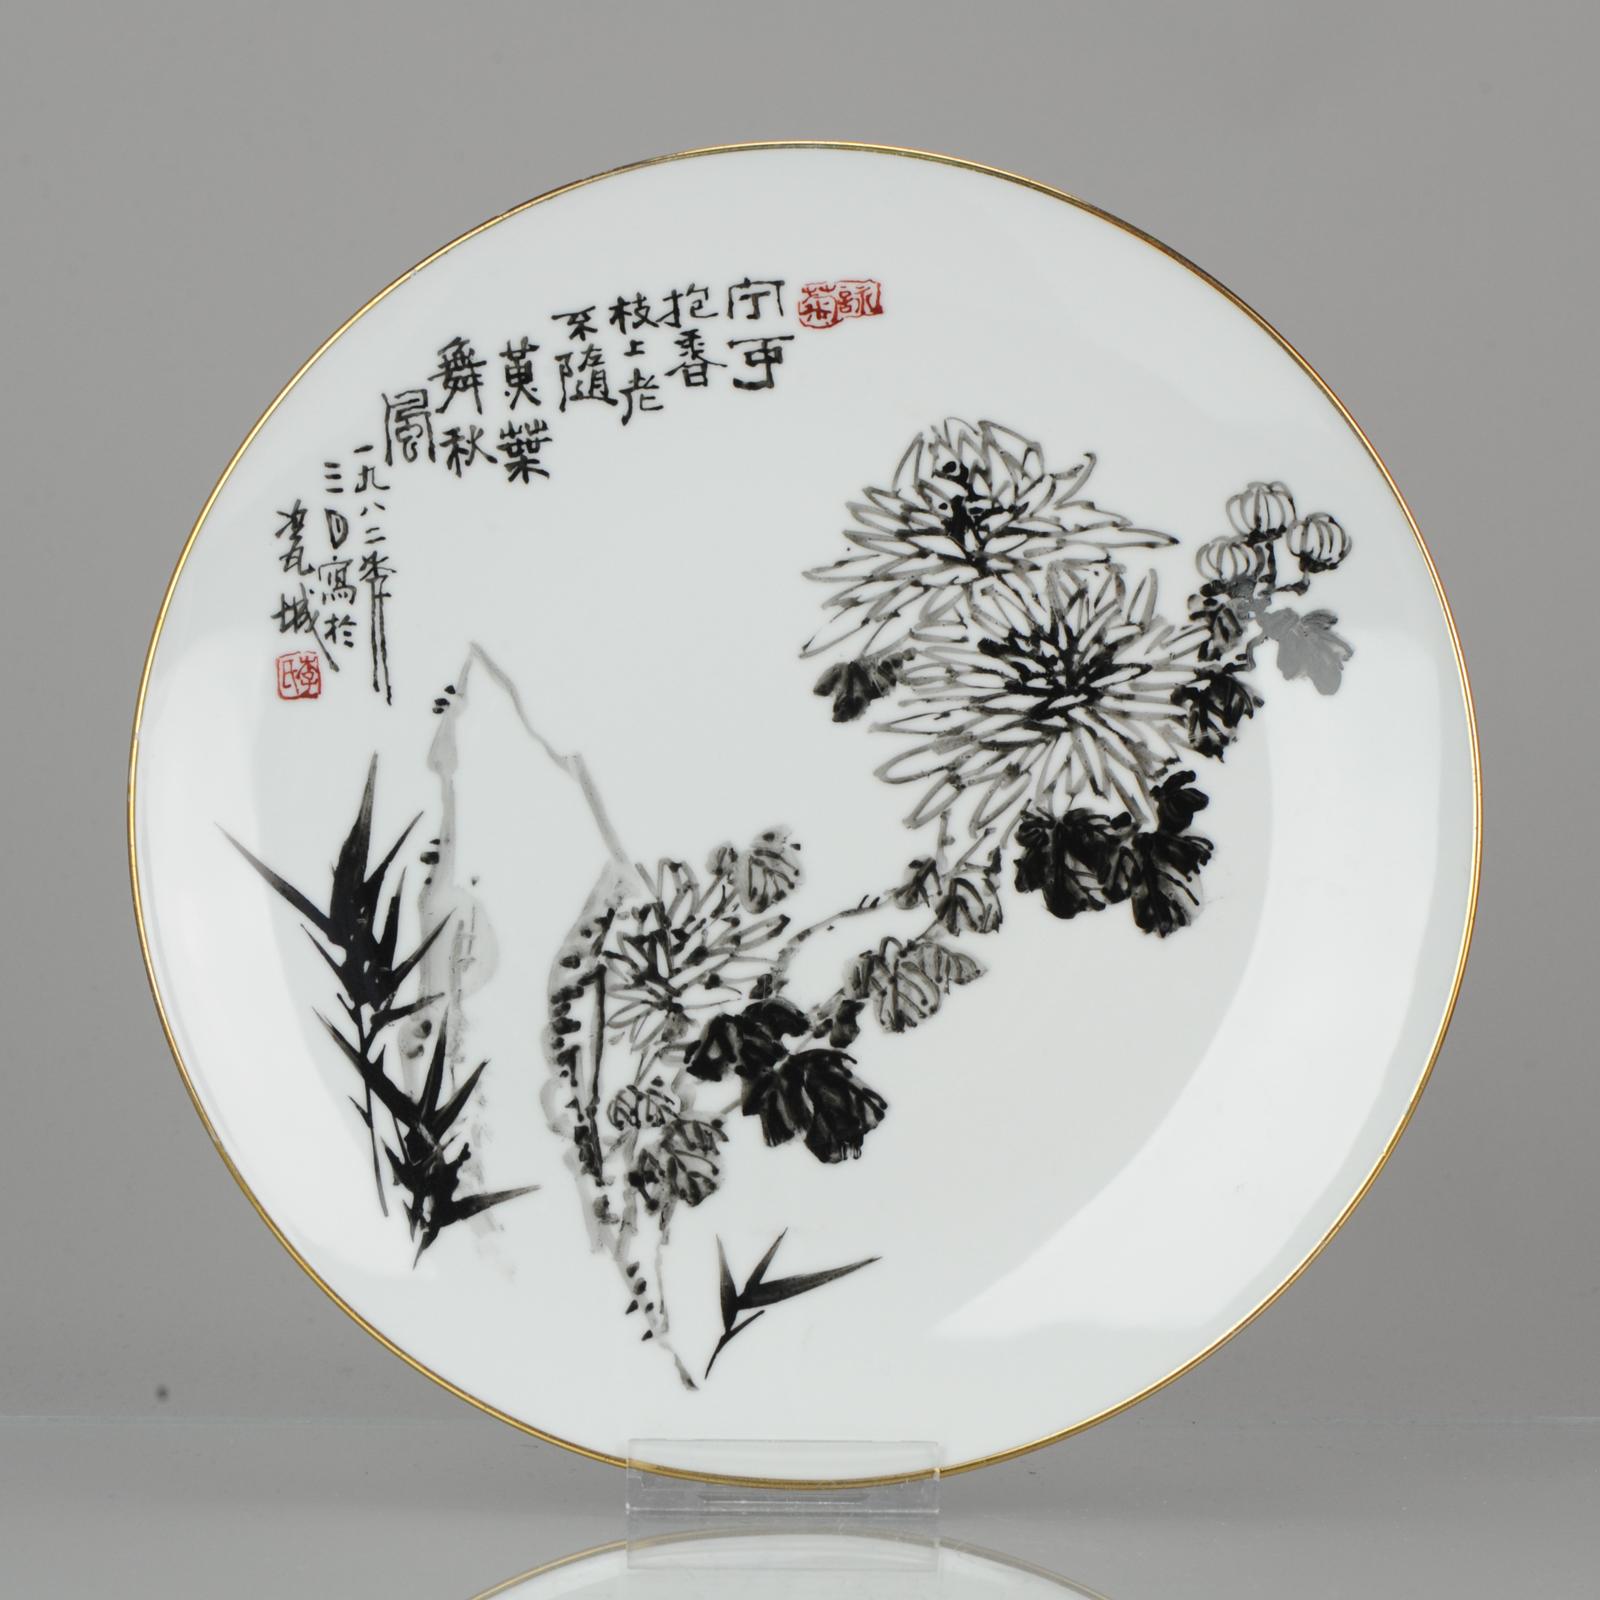 A very nicely painted plate dating to 1982. With a poem and a scene of bamboo and chrysanthemum.

Chrysanthemum

One of the 